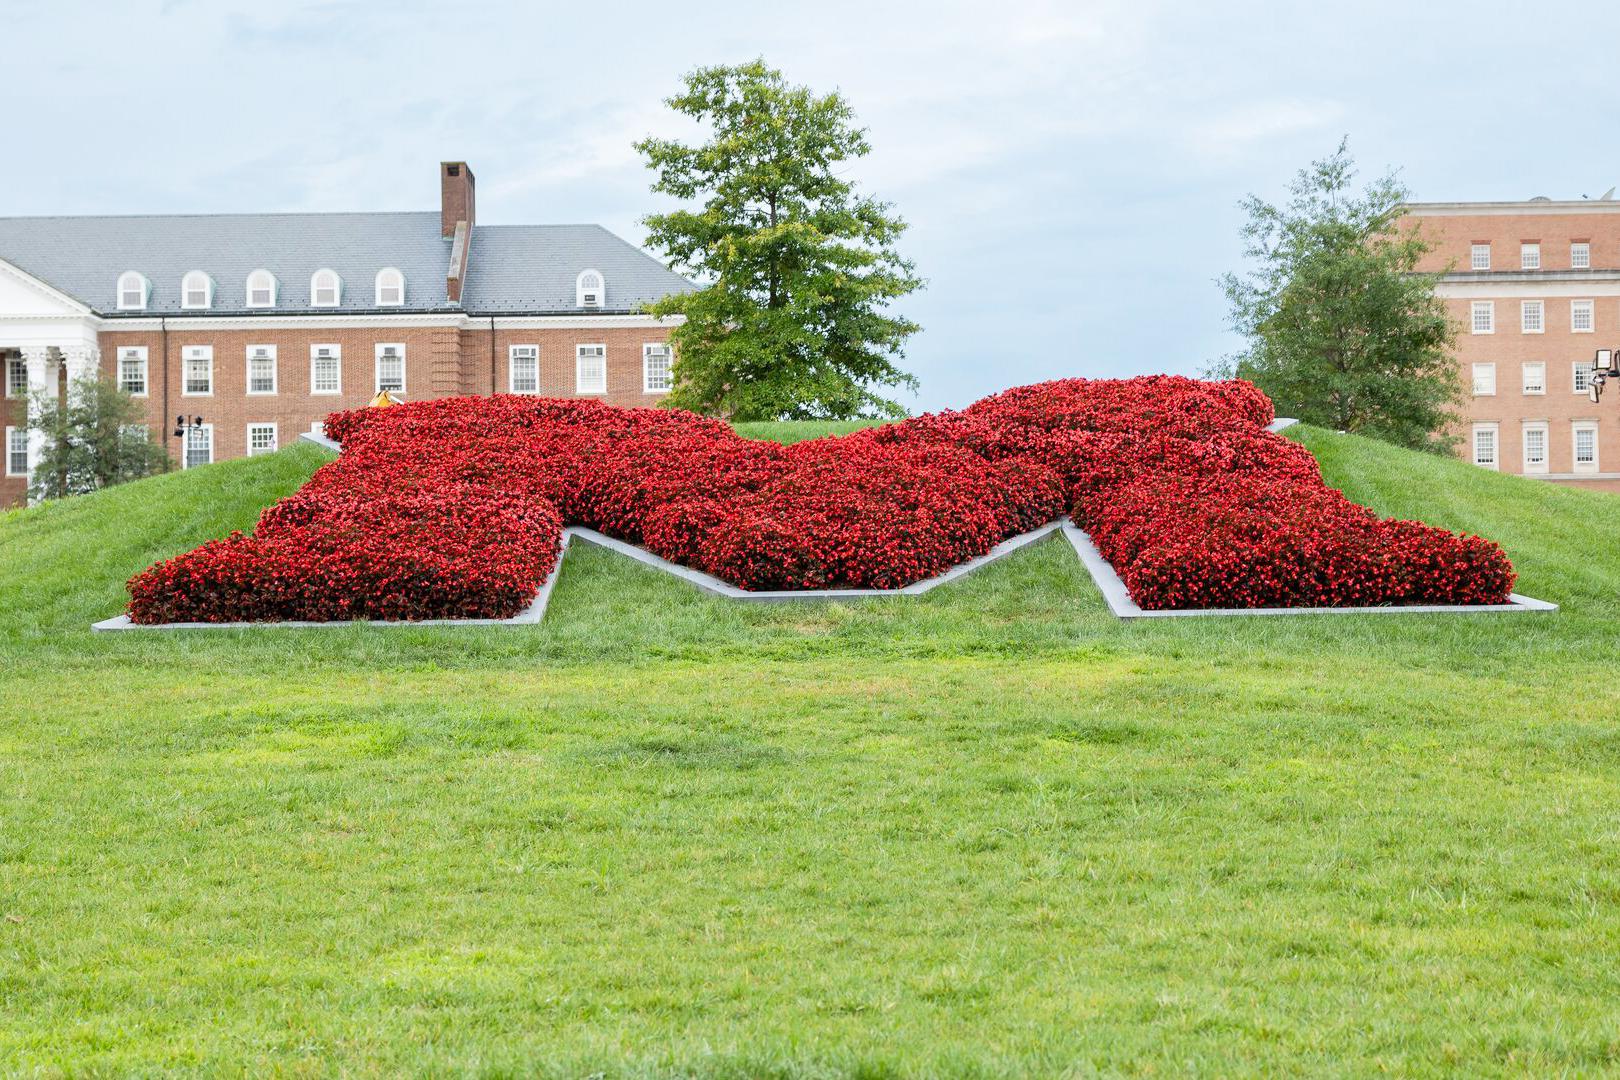 A bed of flowers with red flowers in the shape of an M with a building in the background.